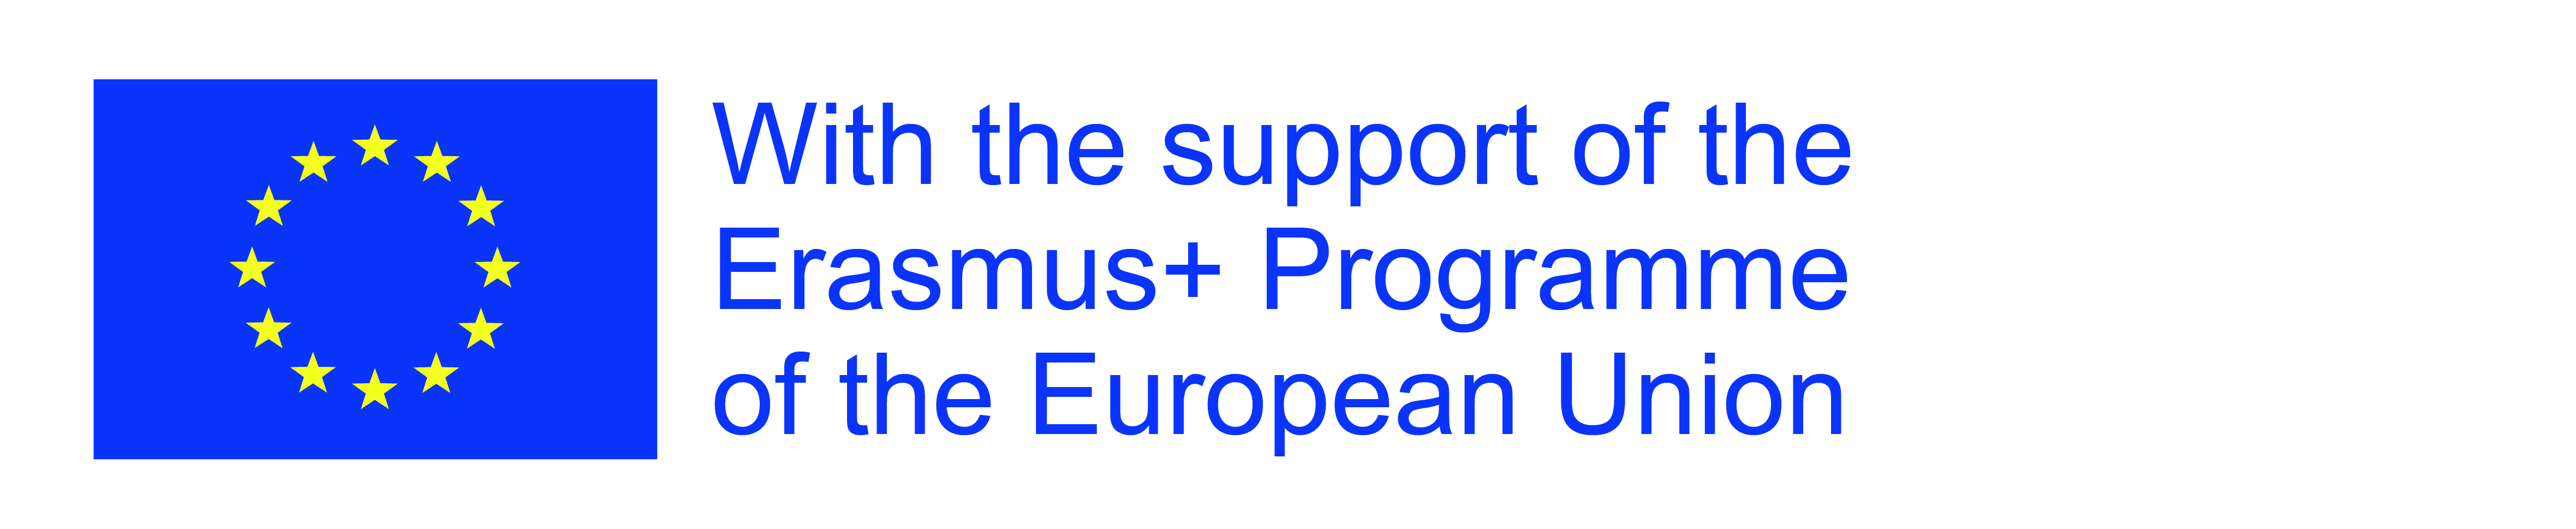 European Quality of Educational Research for Empowering Educators in Ukraine is the Jean Monnet Support to Association Project that has been carried out with the support of Erasmus+ Programme of the European Union